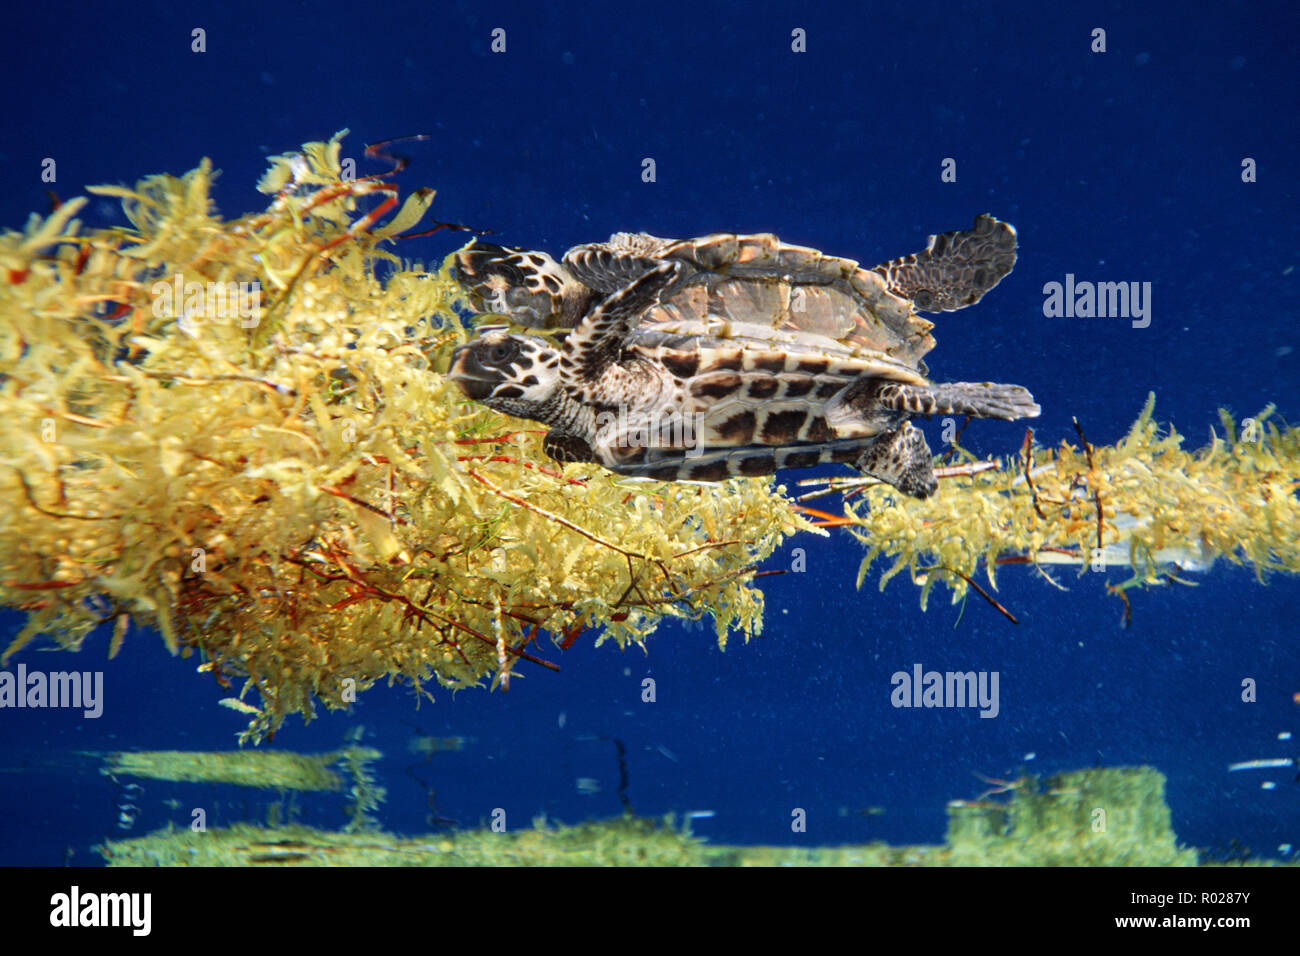 Hawksbill turtle, Eretmochelys imbricata, is endangered and juveniles seek refuge in the open ocean from predators in floating Sargassum weed, Florida Stock Photo